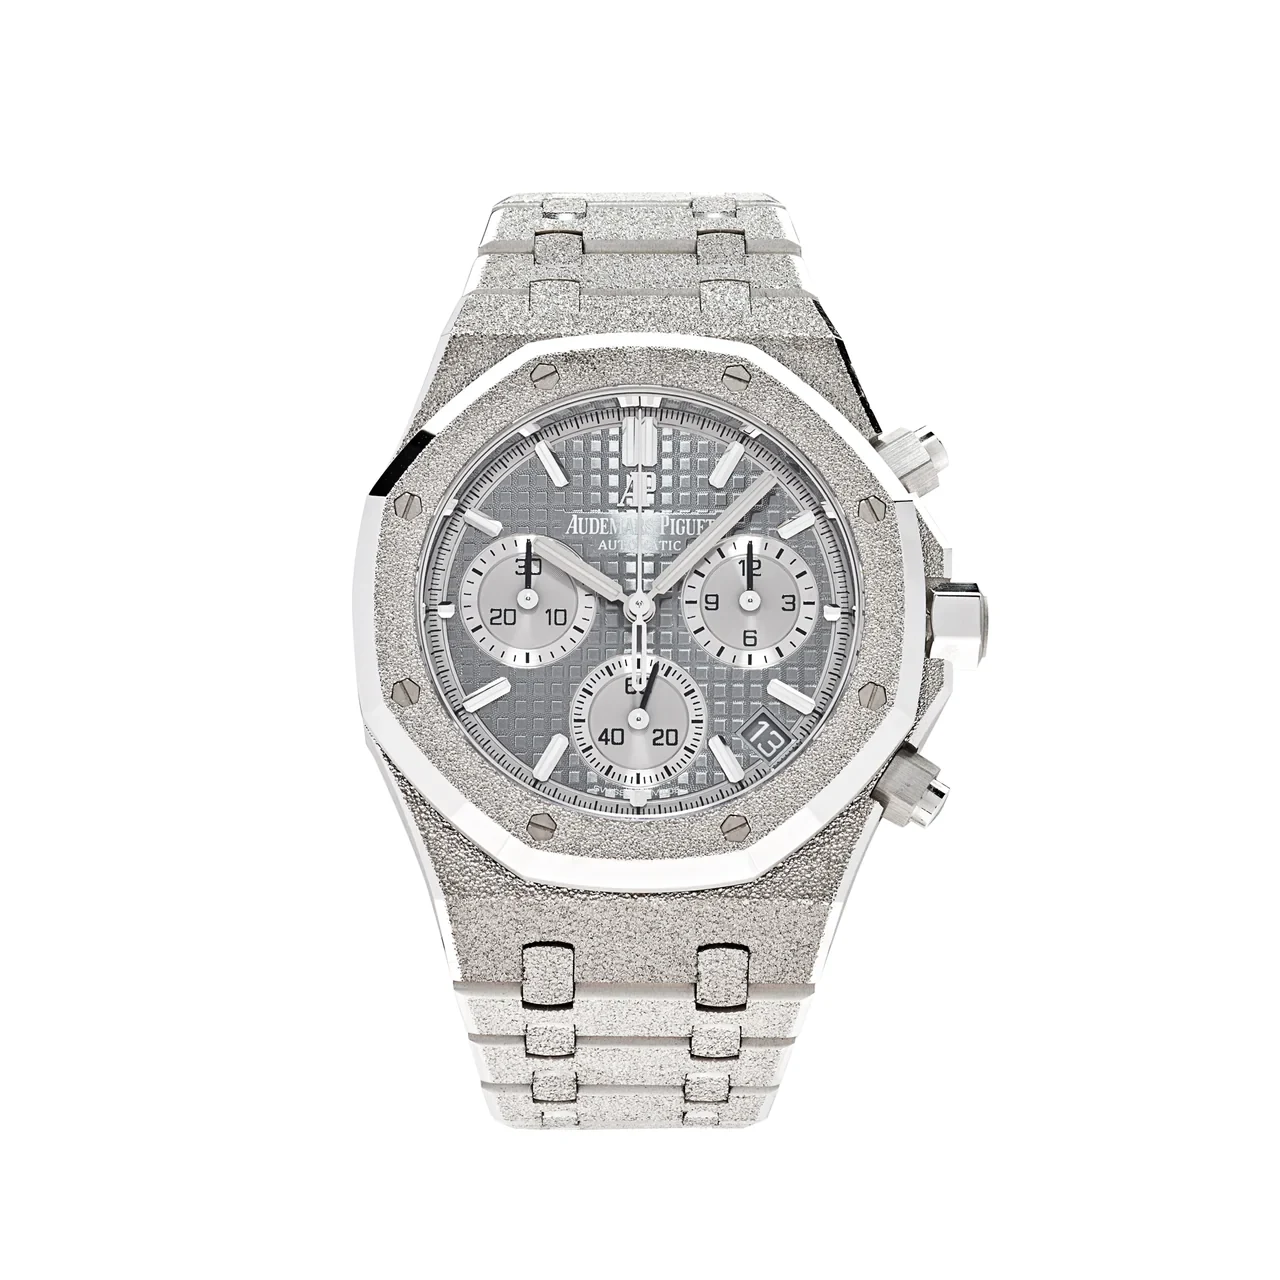 2021 Audemars Piguet Royal Oak Chronograph 41 Frosted White Gold / Gray - Limited to 200 Pieces 26239BC.GG.1224BC.01 Listing Image